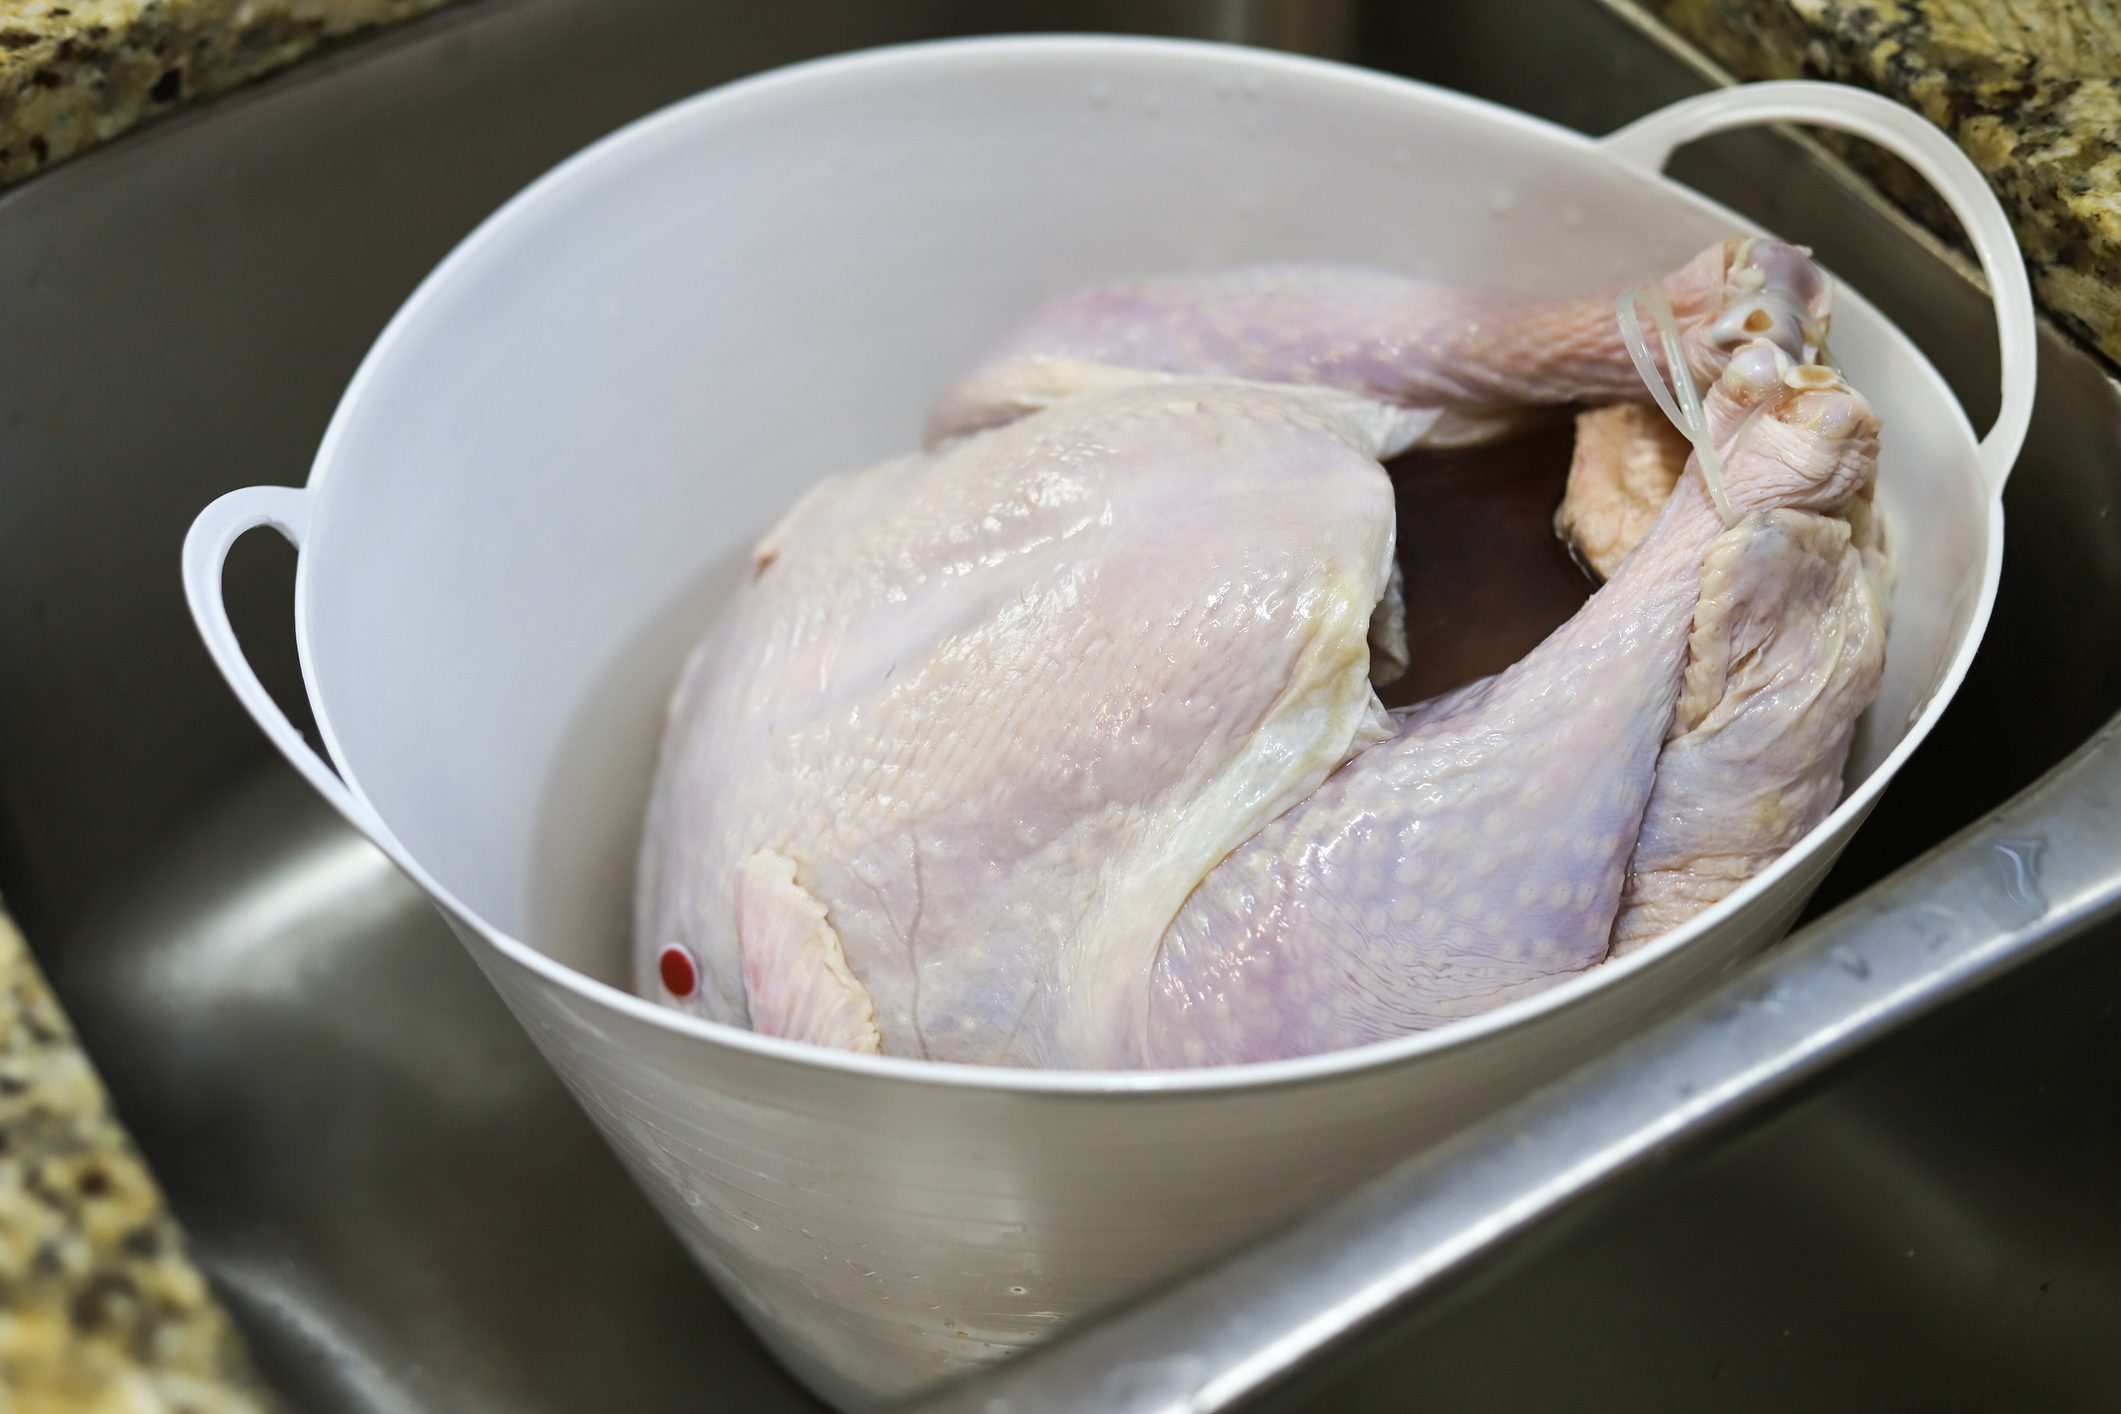 A frozen organic turkey thawing in a kitchen sink in tub of water